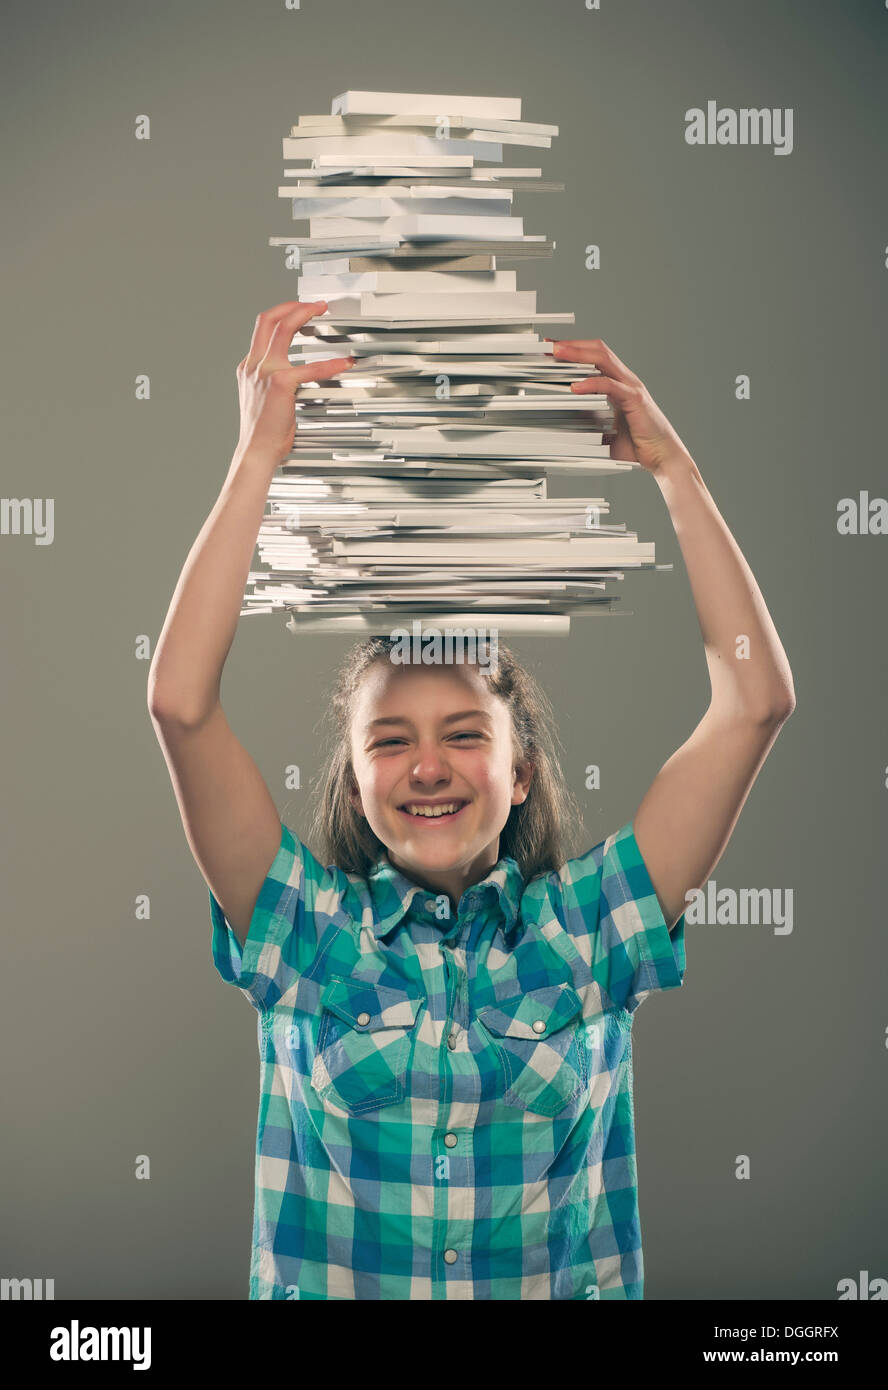 Girl carrying books on head Stock Photo